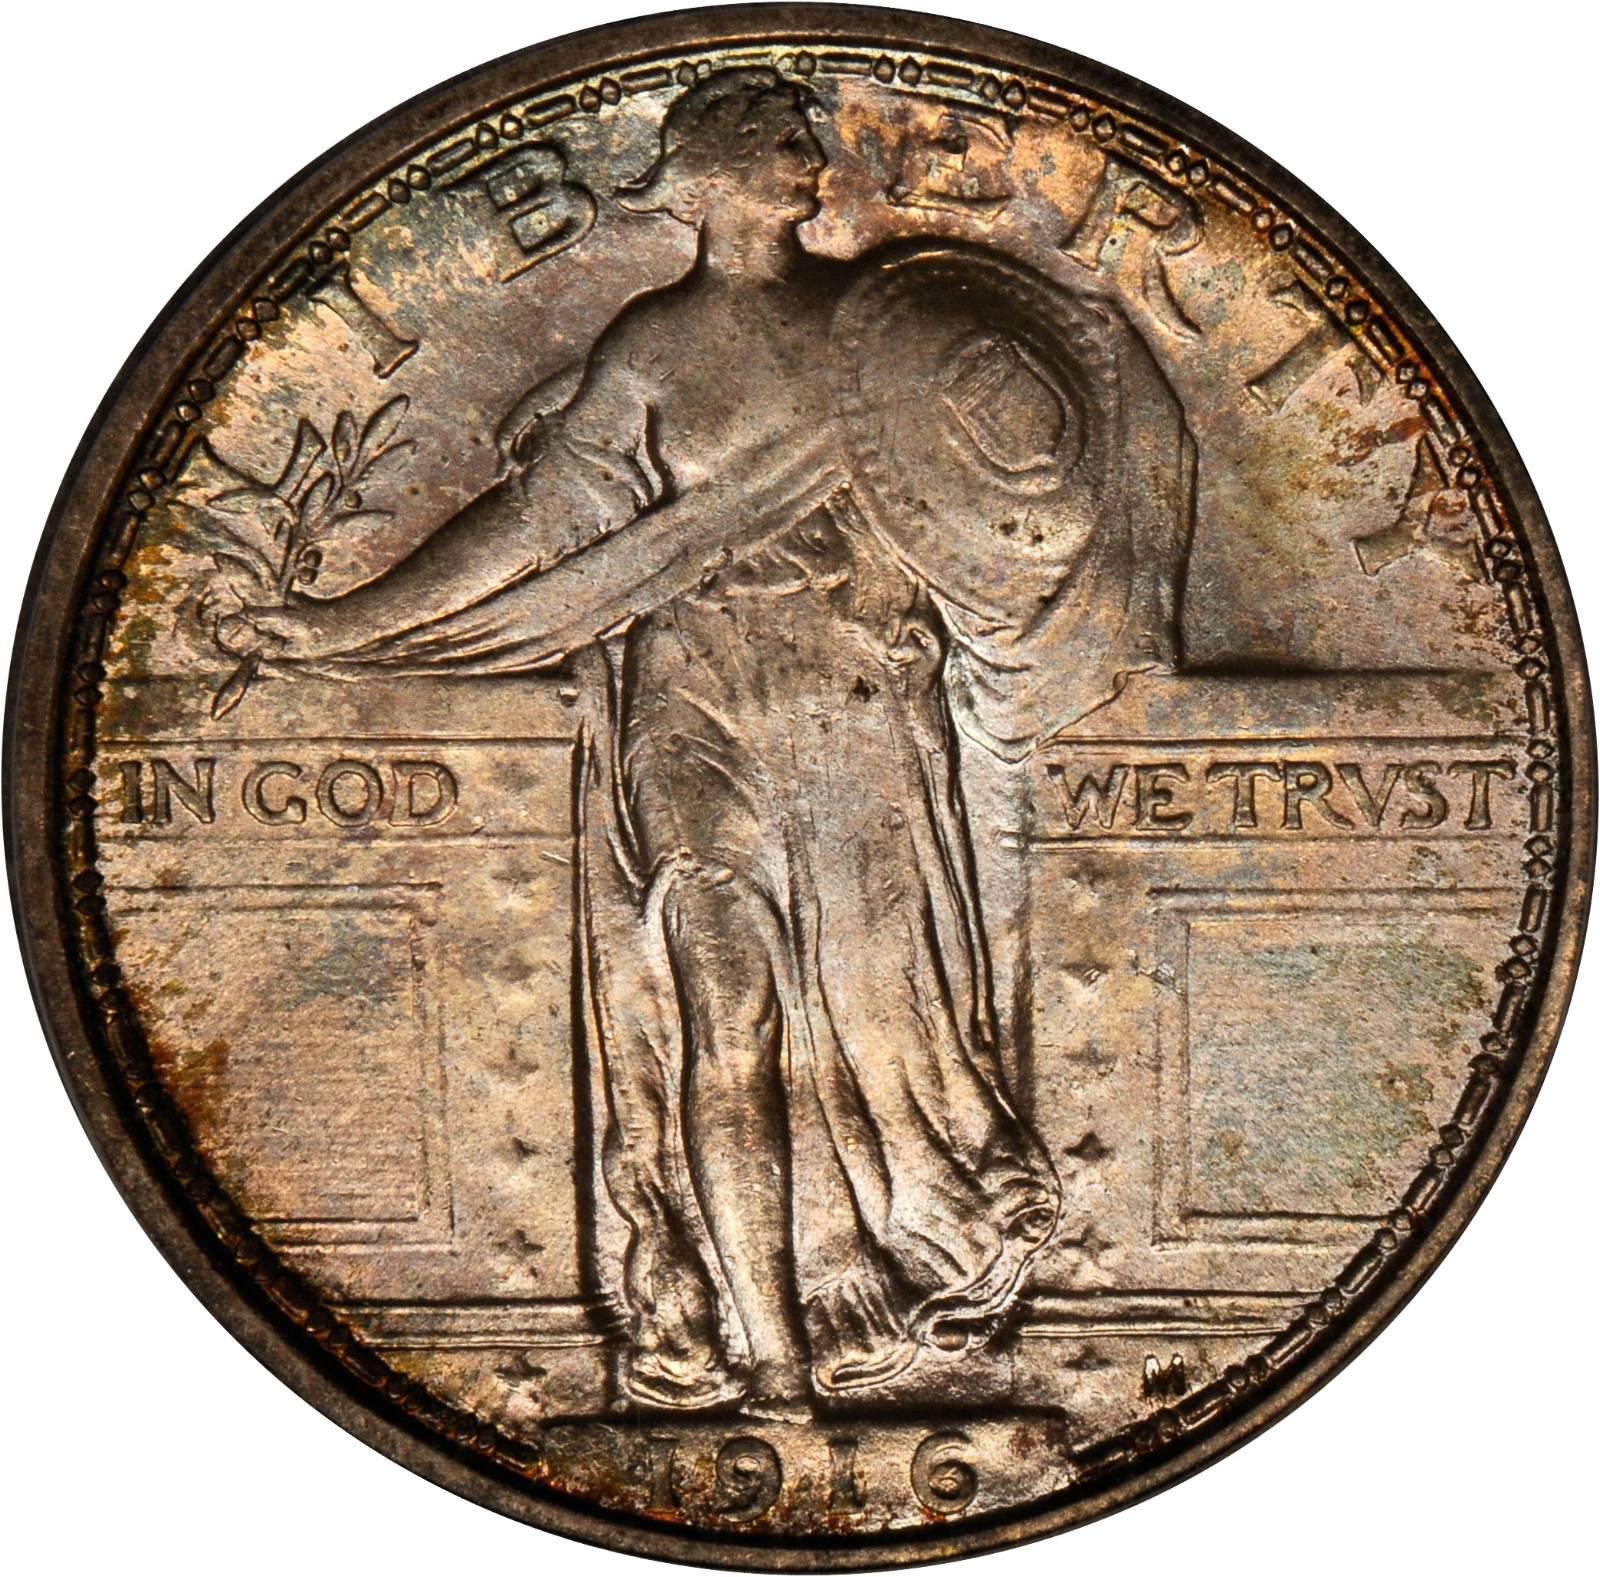 the-1916-standing-liberty-quarter-a-coin-to-own-coinappraiser